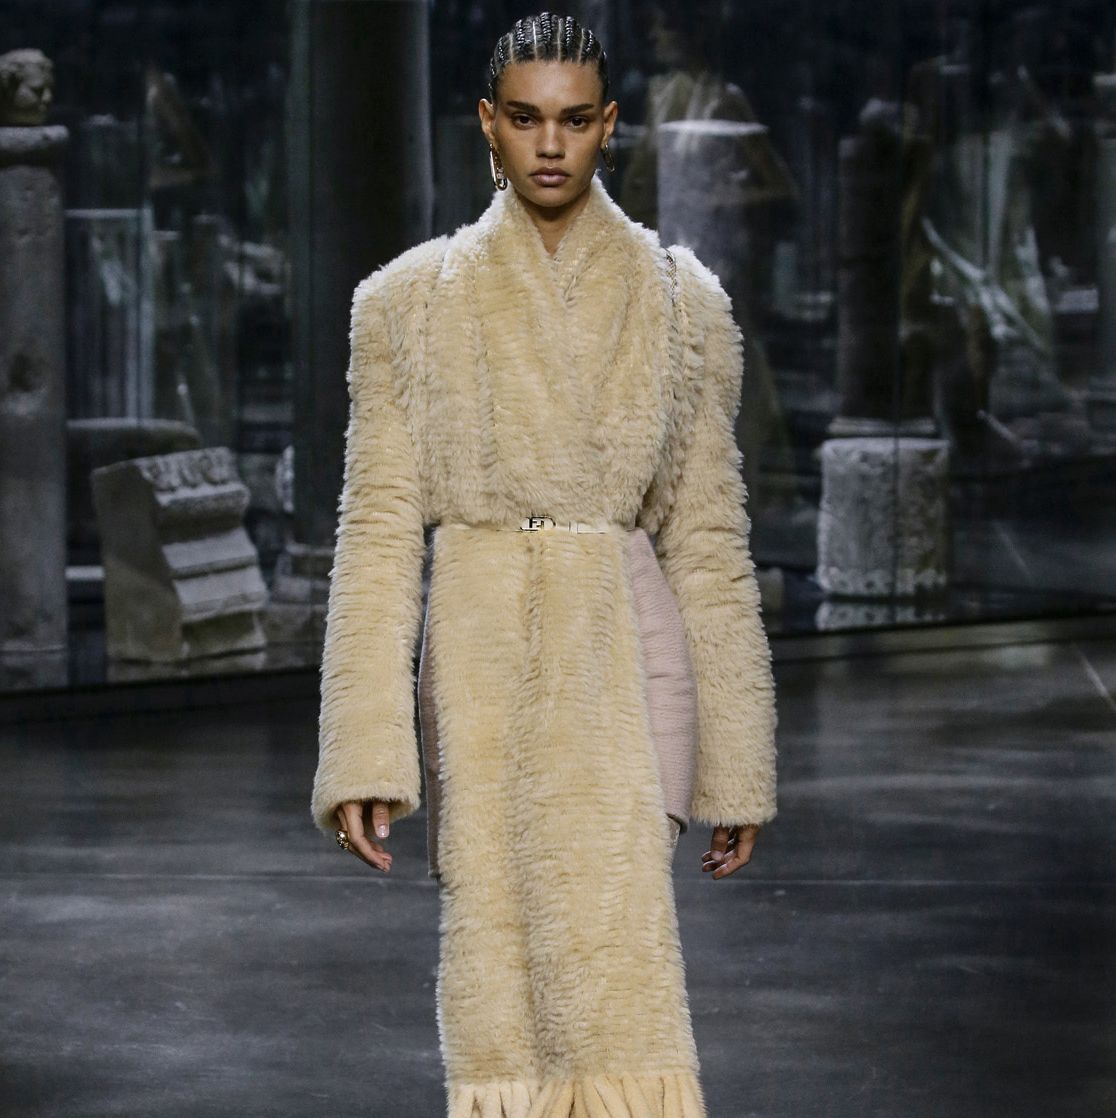 Fendi's Fall/Winter 2021 Collection Offers All The Neutral Pieces